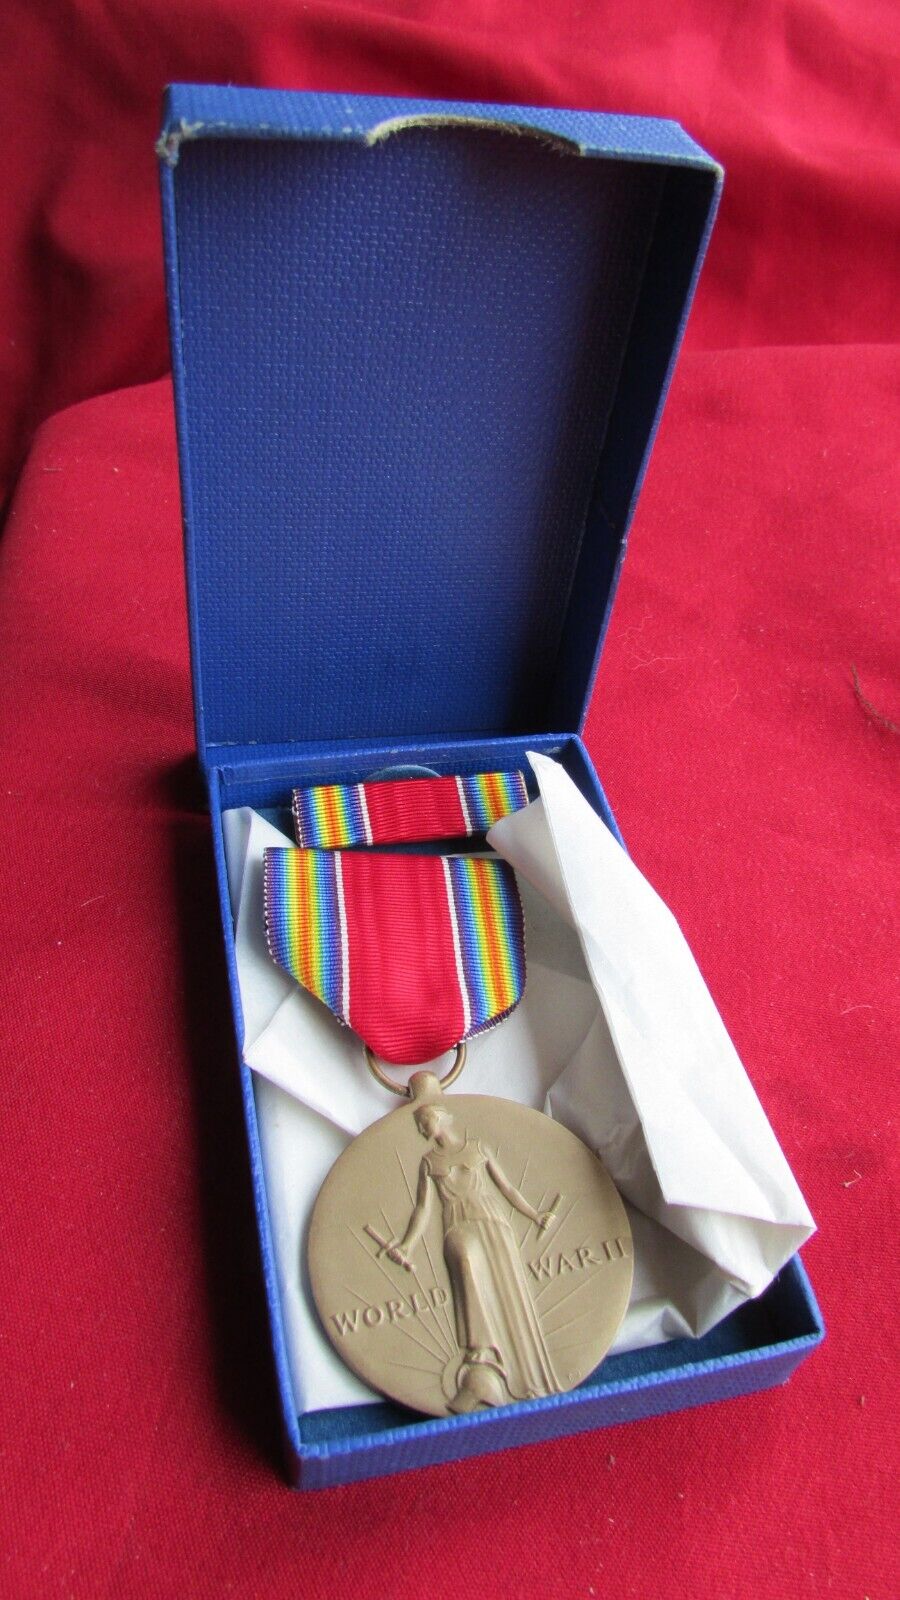 VINTAGE UNITED STATES WORLD WAR II CAMPAIGN AND SERVICES VICTORY MEDAL W/ RIBBON